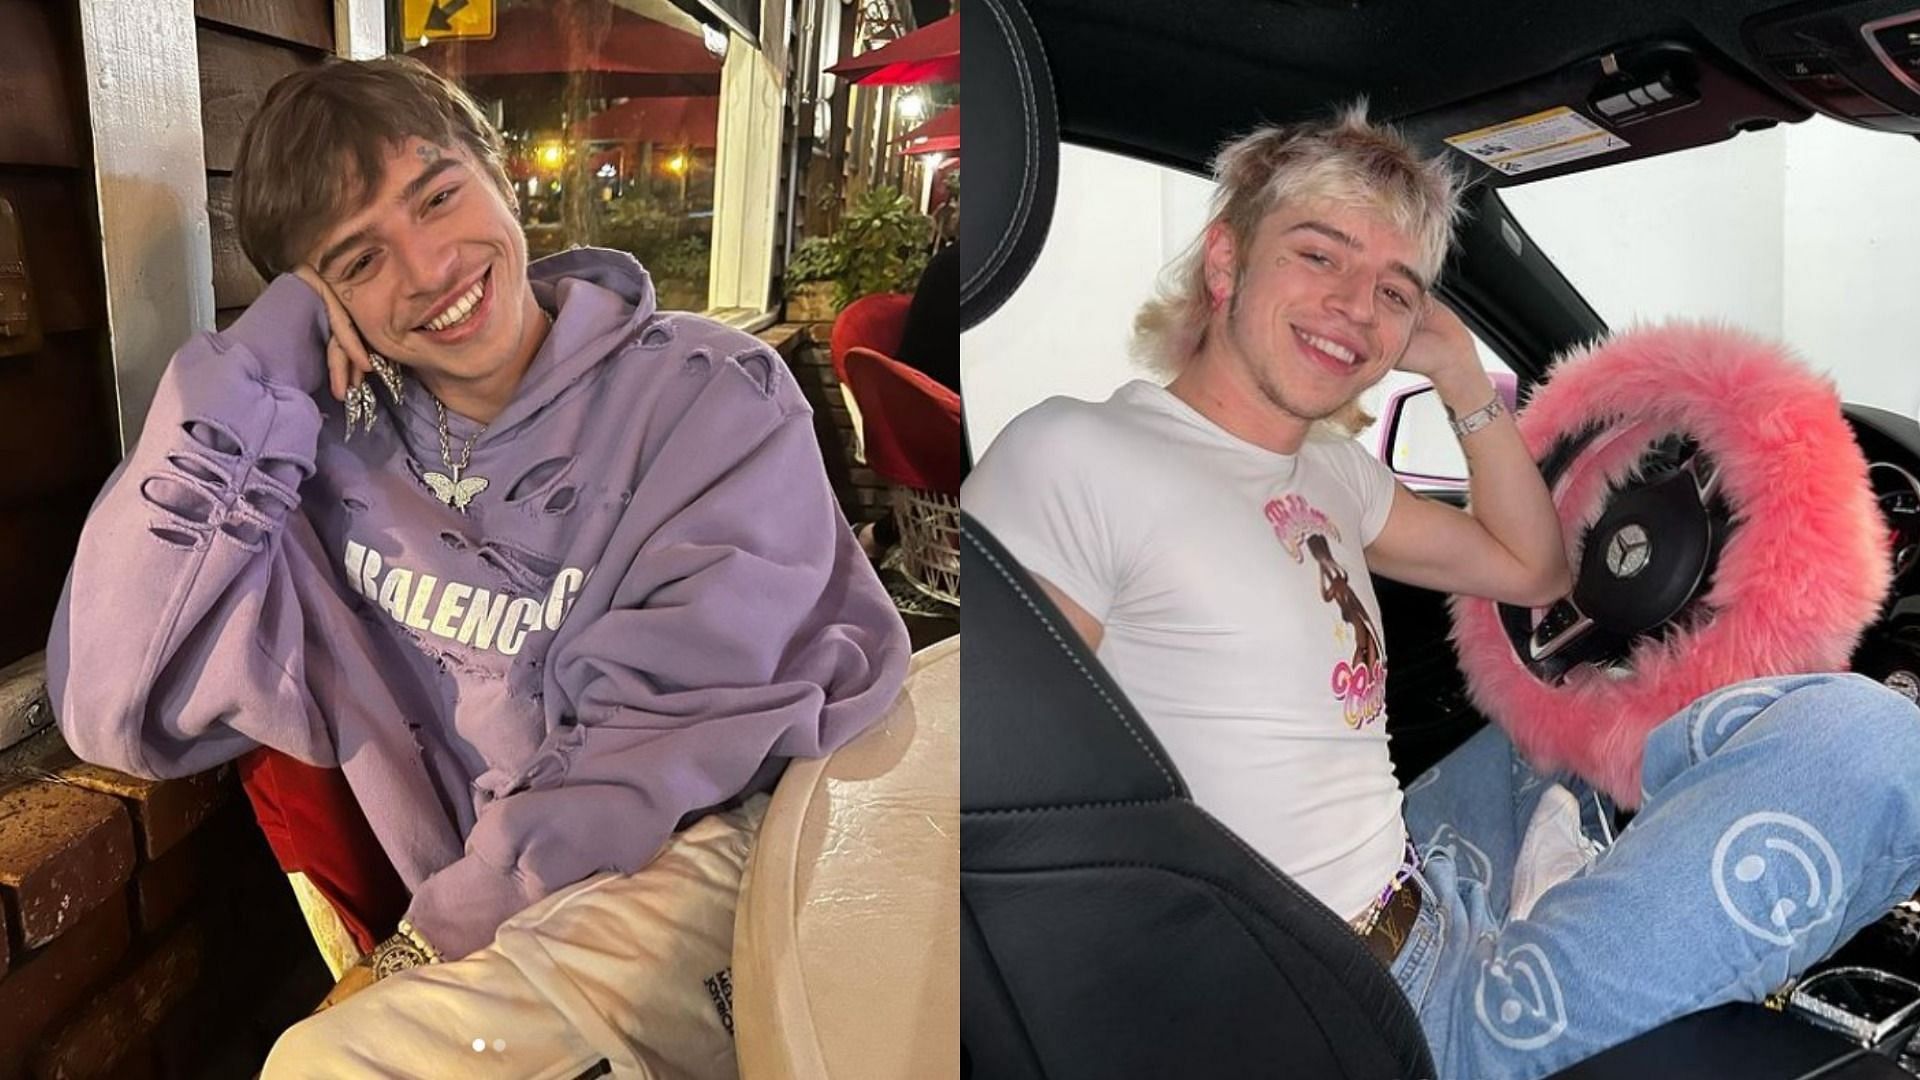 TikToker Icy Wyatt was arrested for allegedly assaulting a police officer and another person with a firearm (Images via icywyatt/Instagram)